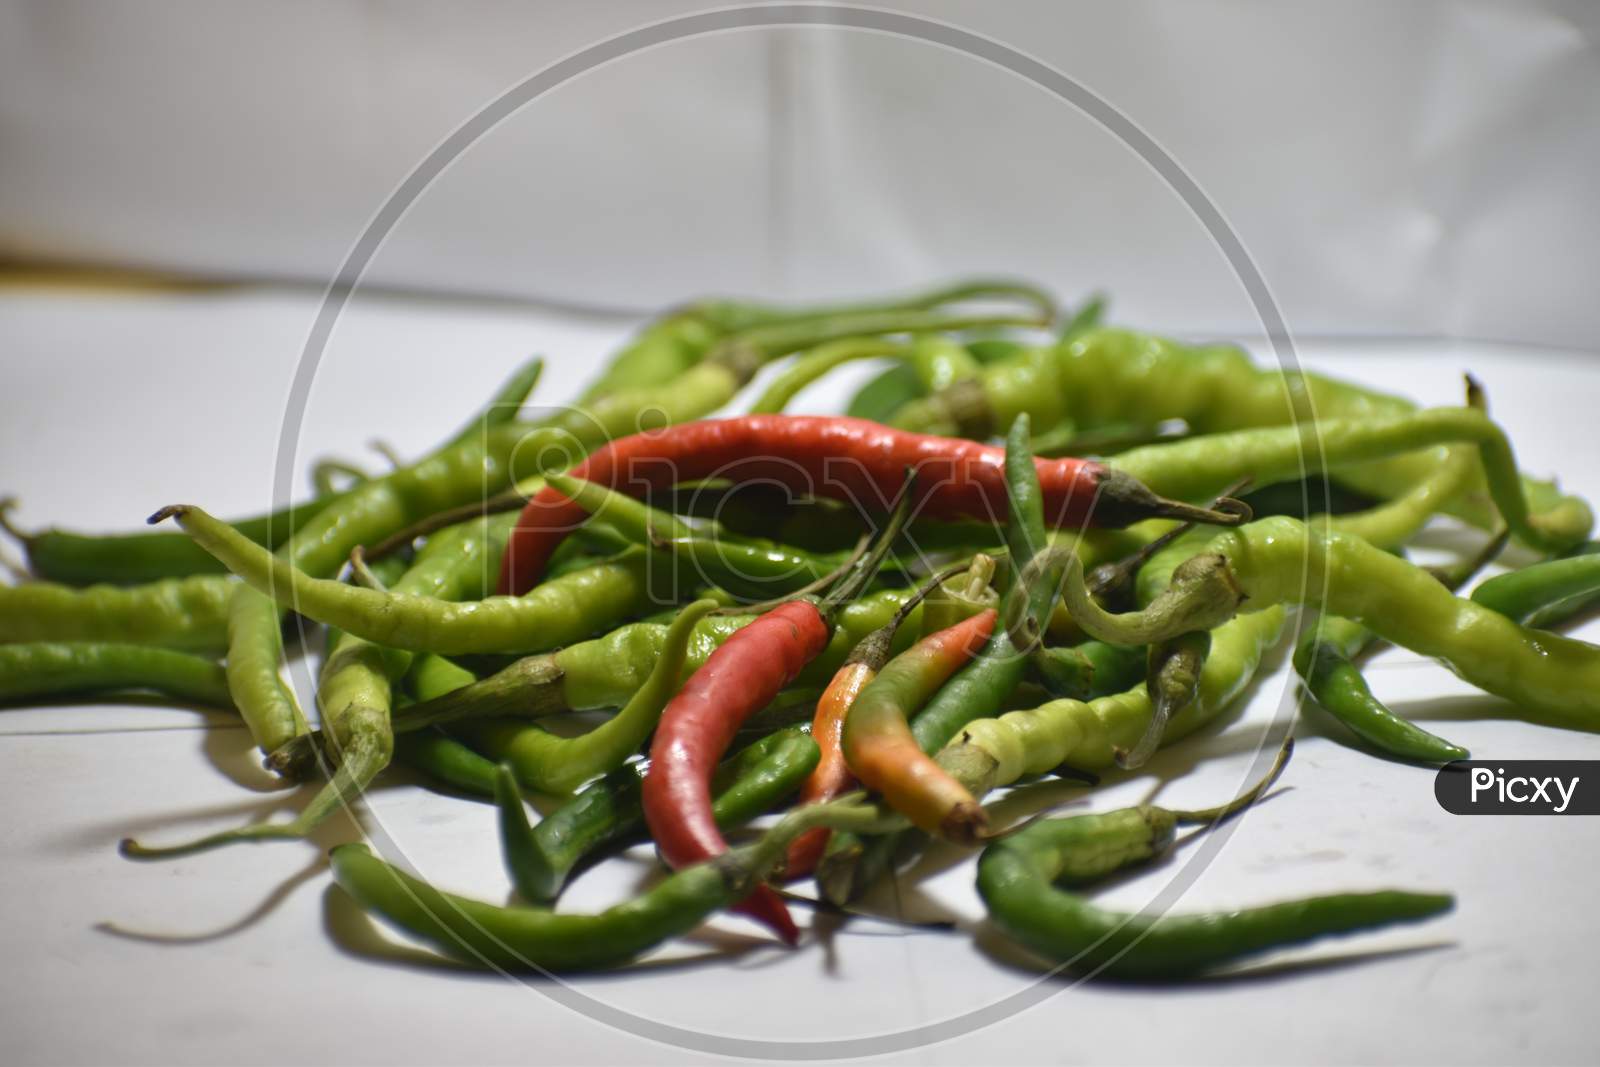 Green chilli peppers in Indian market